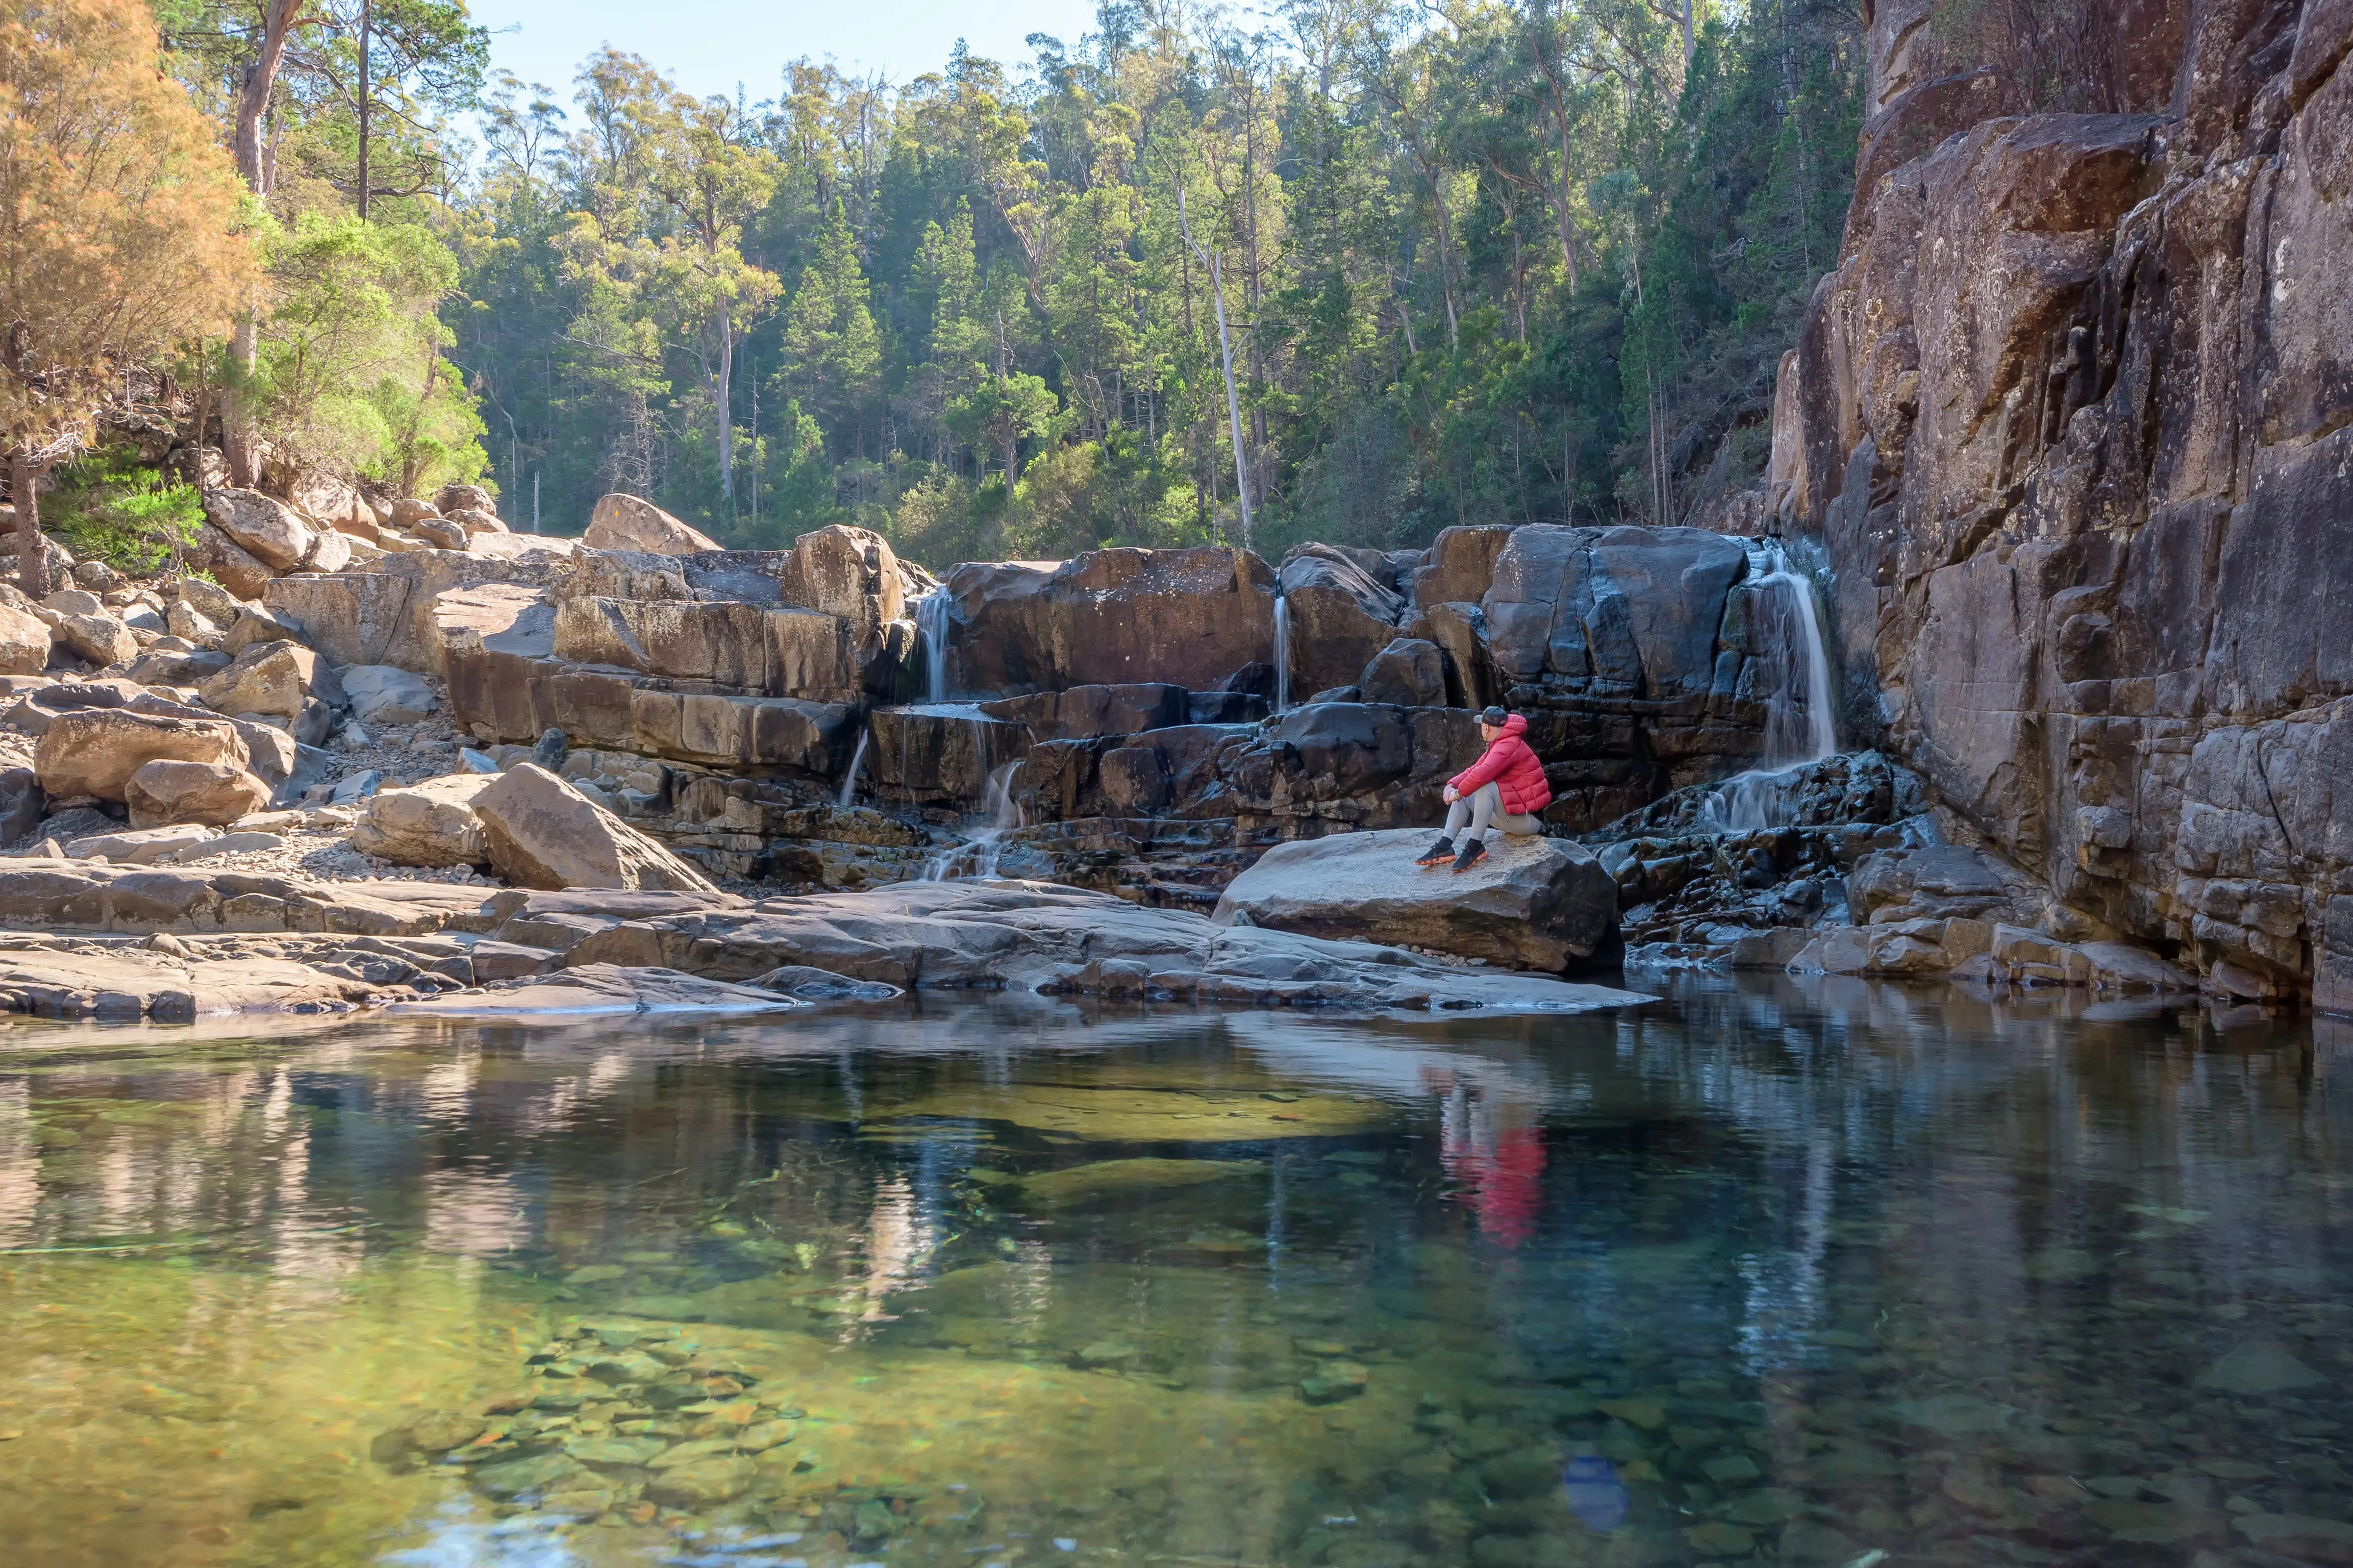 In the foreground, a man sits on the rocks by a tranquil pool at Apsley Gorge. There is rainforset in the back drop.